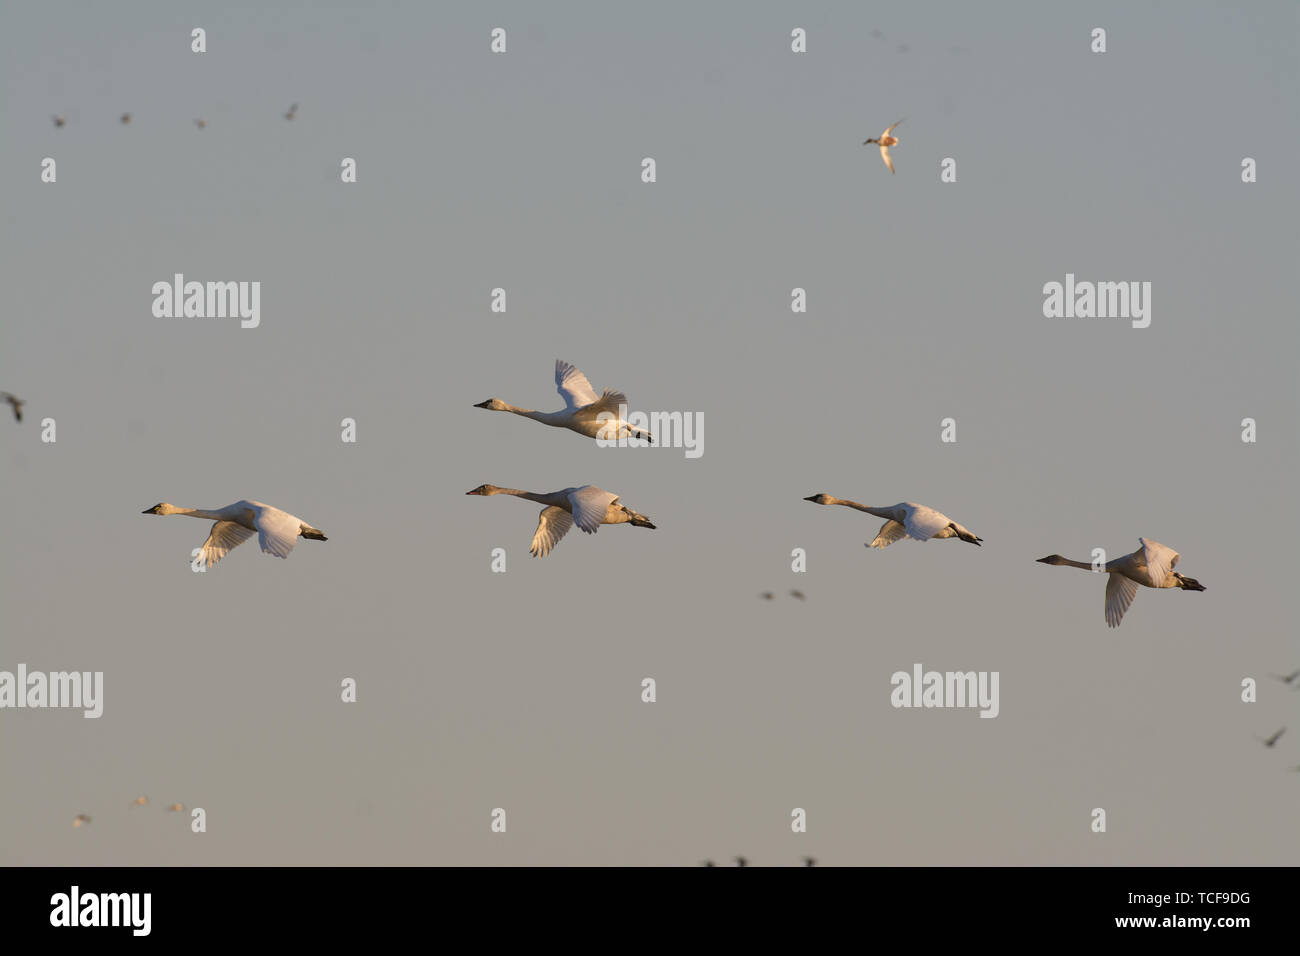 View of small flock of wild geese flying in sky Stock Photo